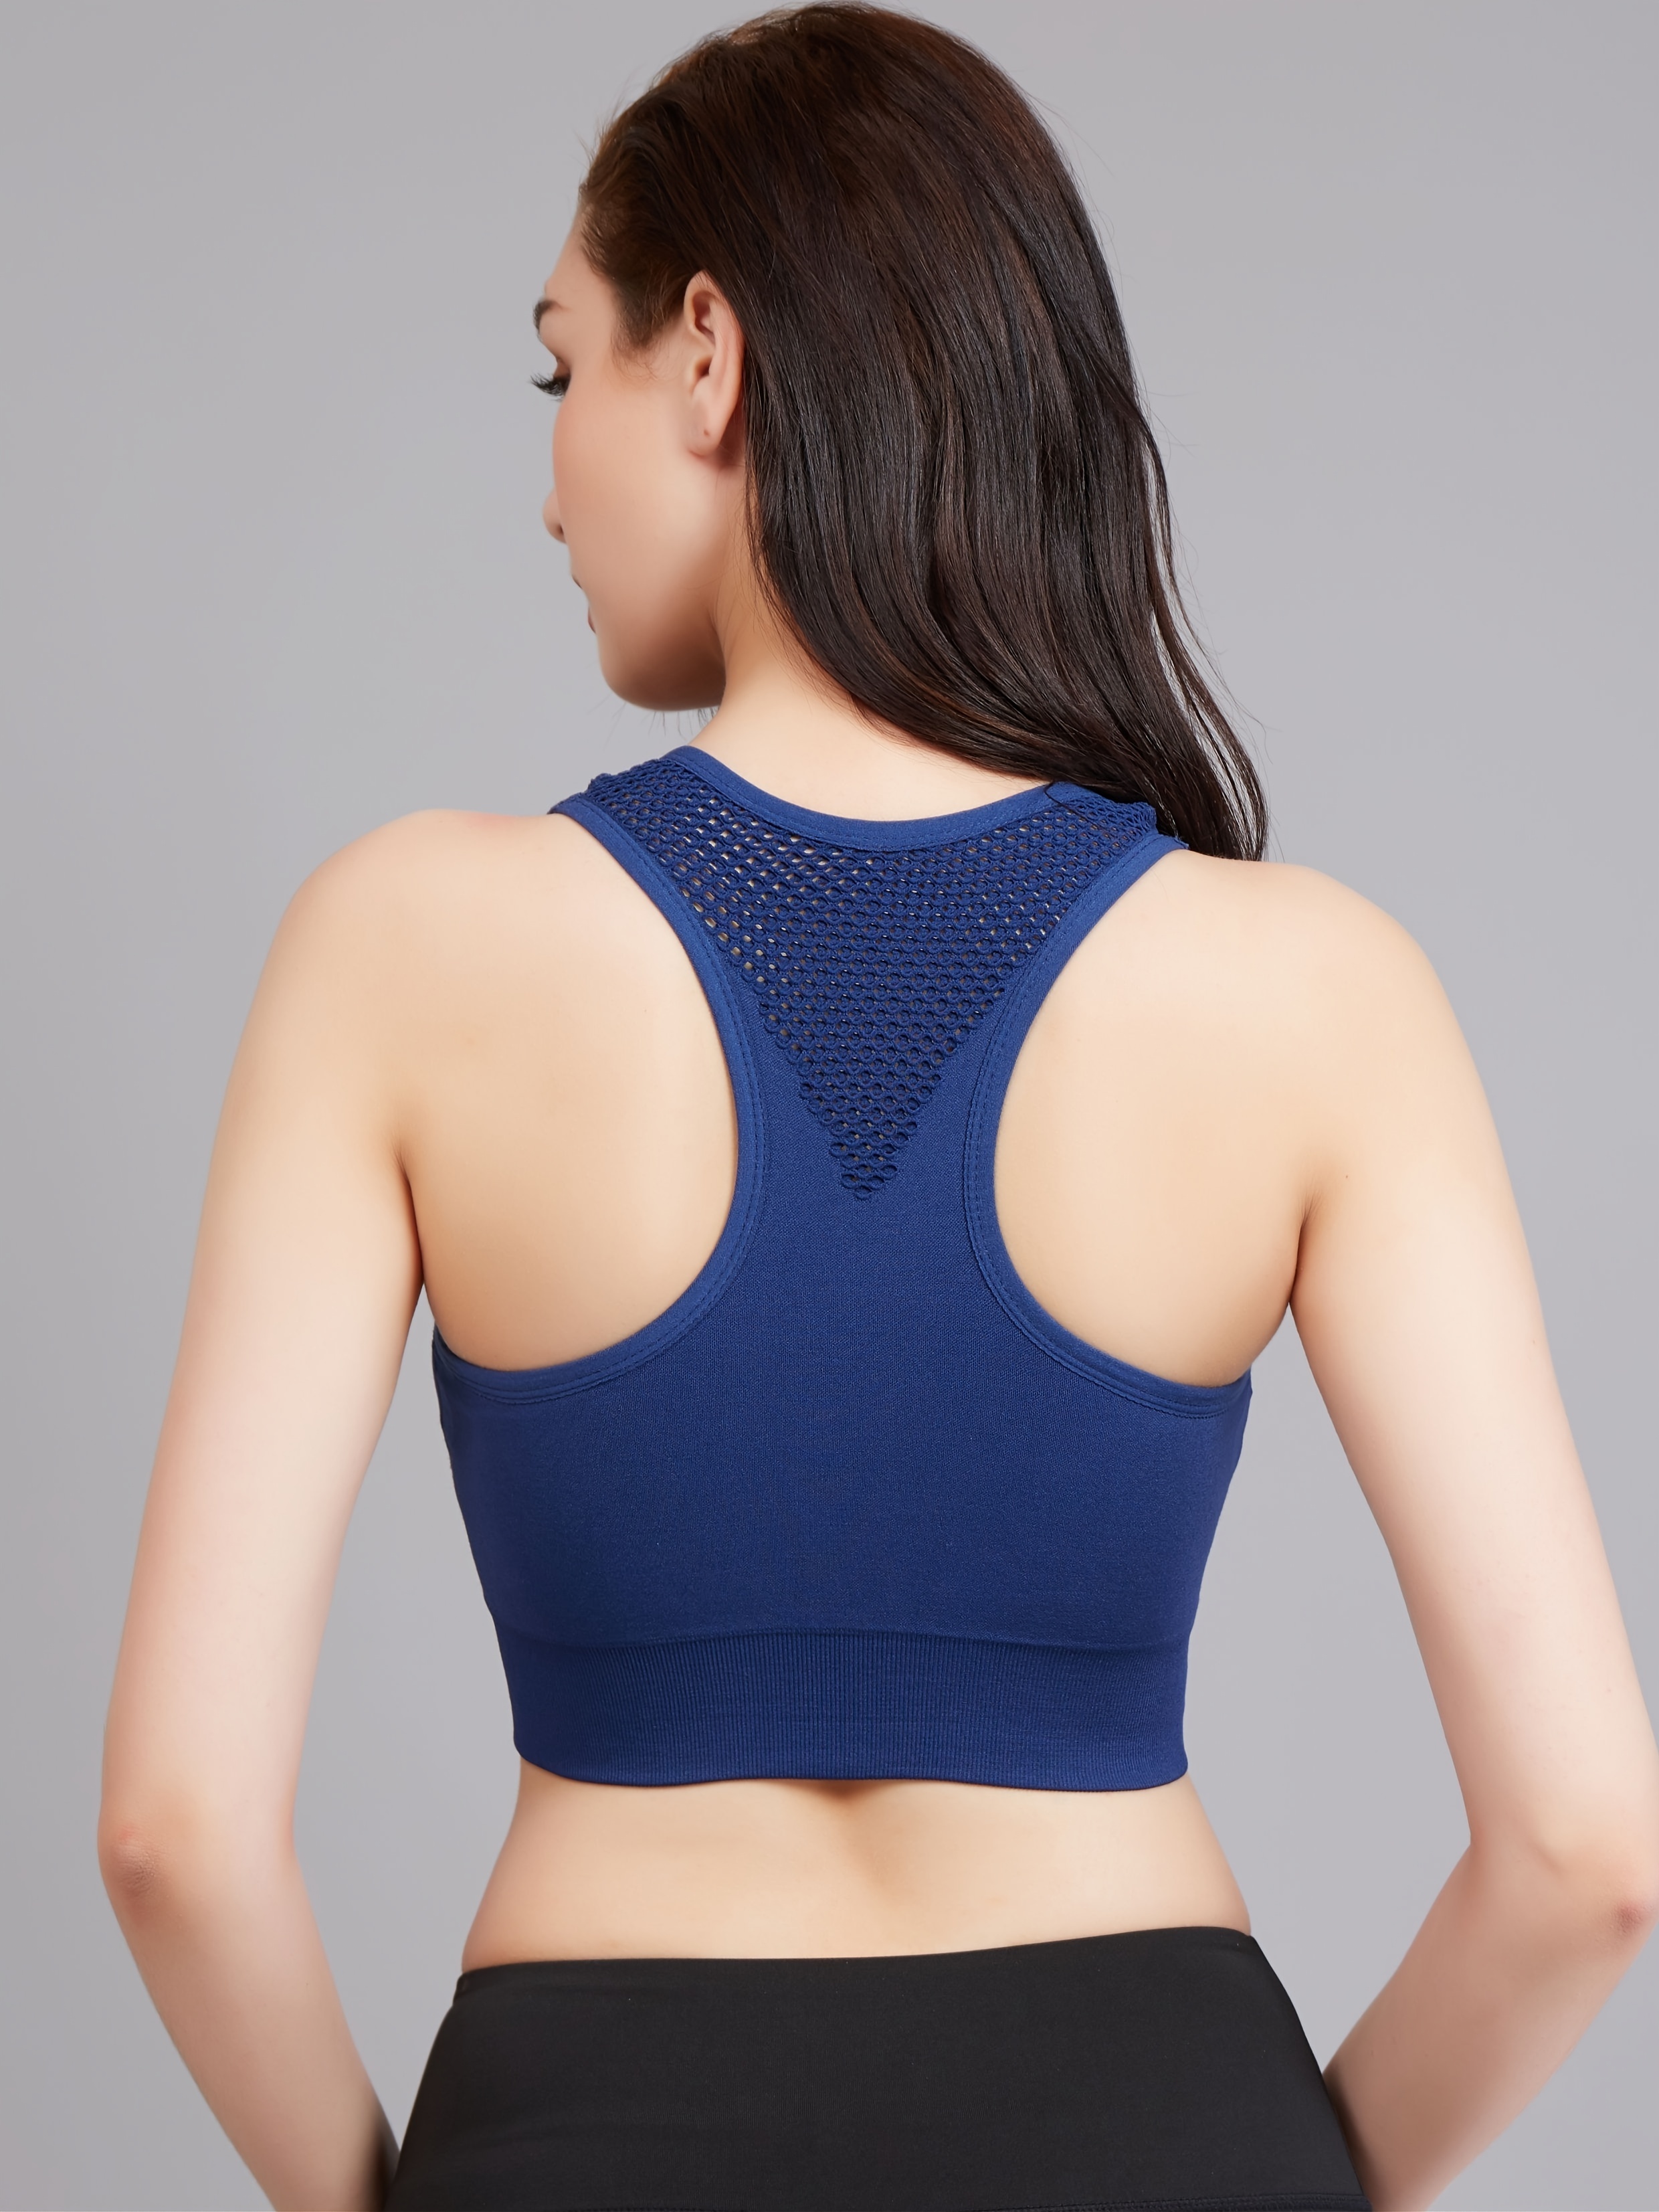 Womens High Elastic Yoga Sports Bra Vest With Chest Pad Shockproof Running  Shirt And Inner Jacket Longline Sports Bra Tank From Lifecup, $16.61